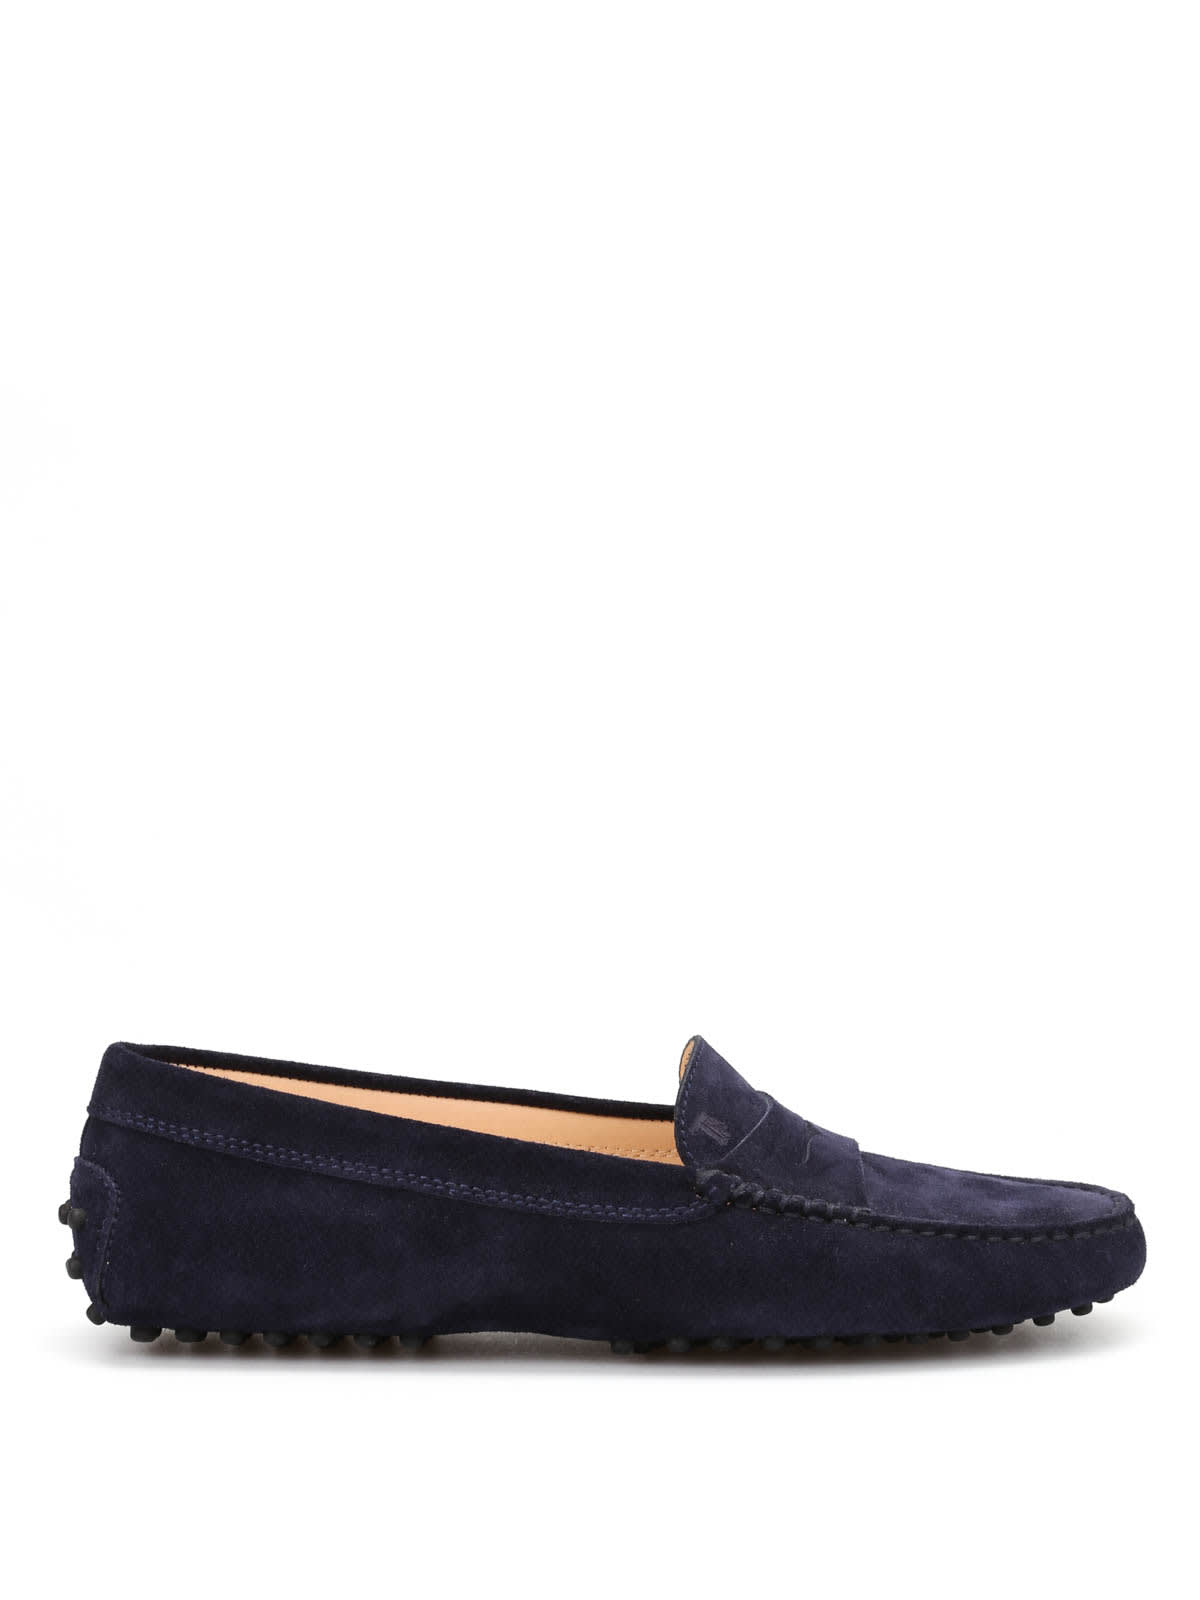 Tods Gommino Driving Shoes In Blue Suede